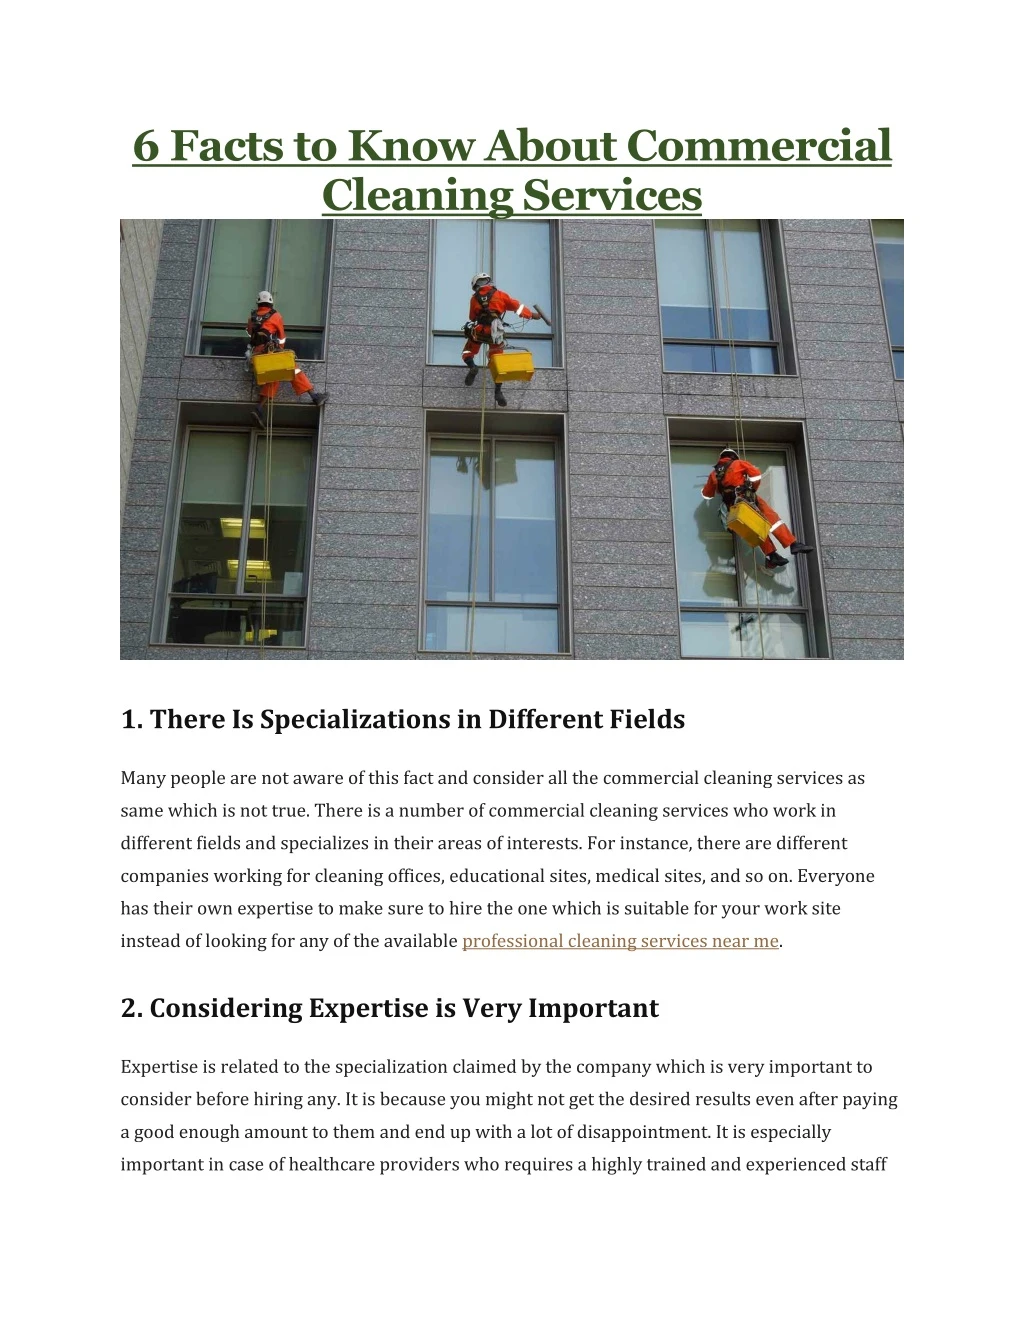 6 facts to know about commercial cleaning services